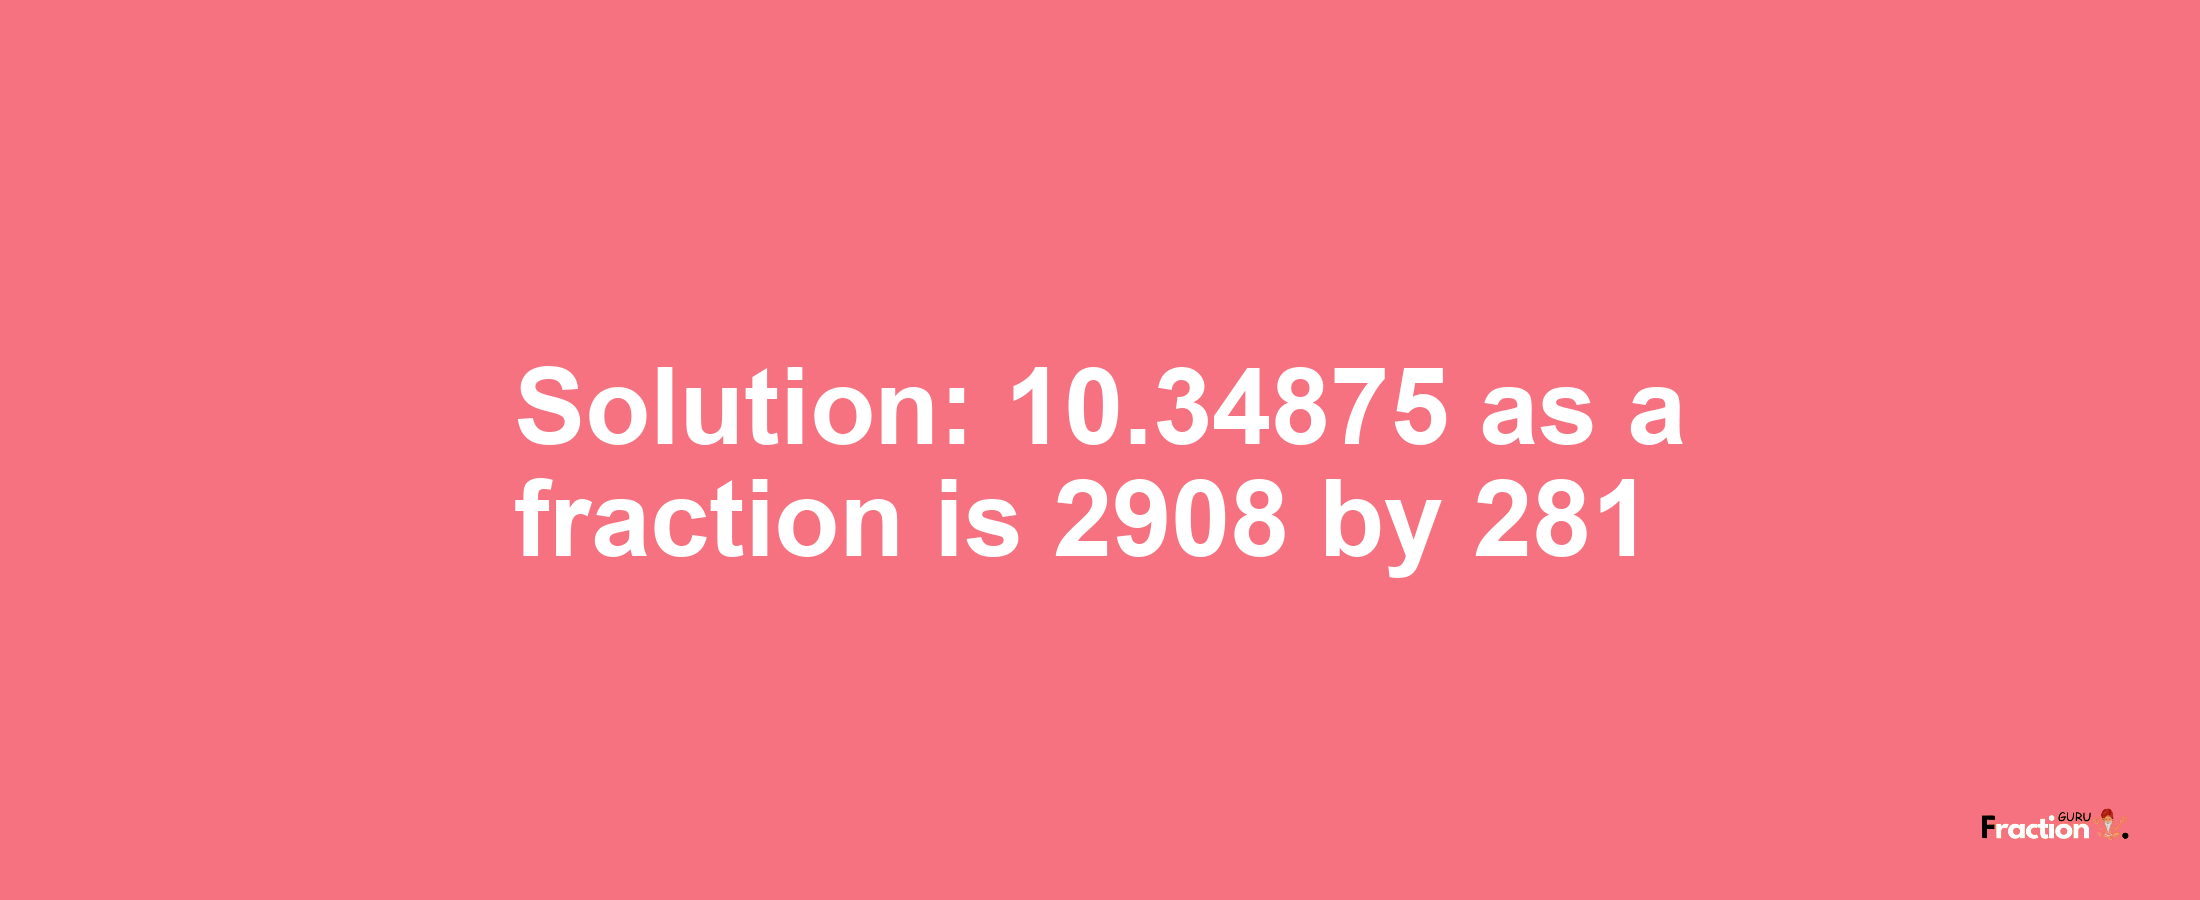 Solution:10.34875 as a fraction is 2908/281